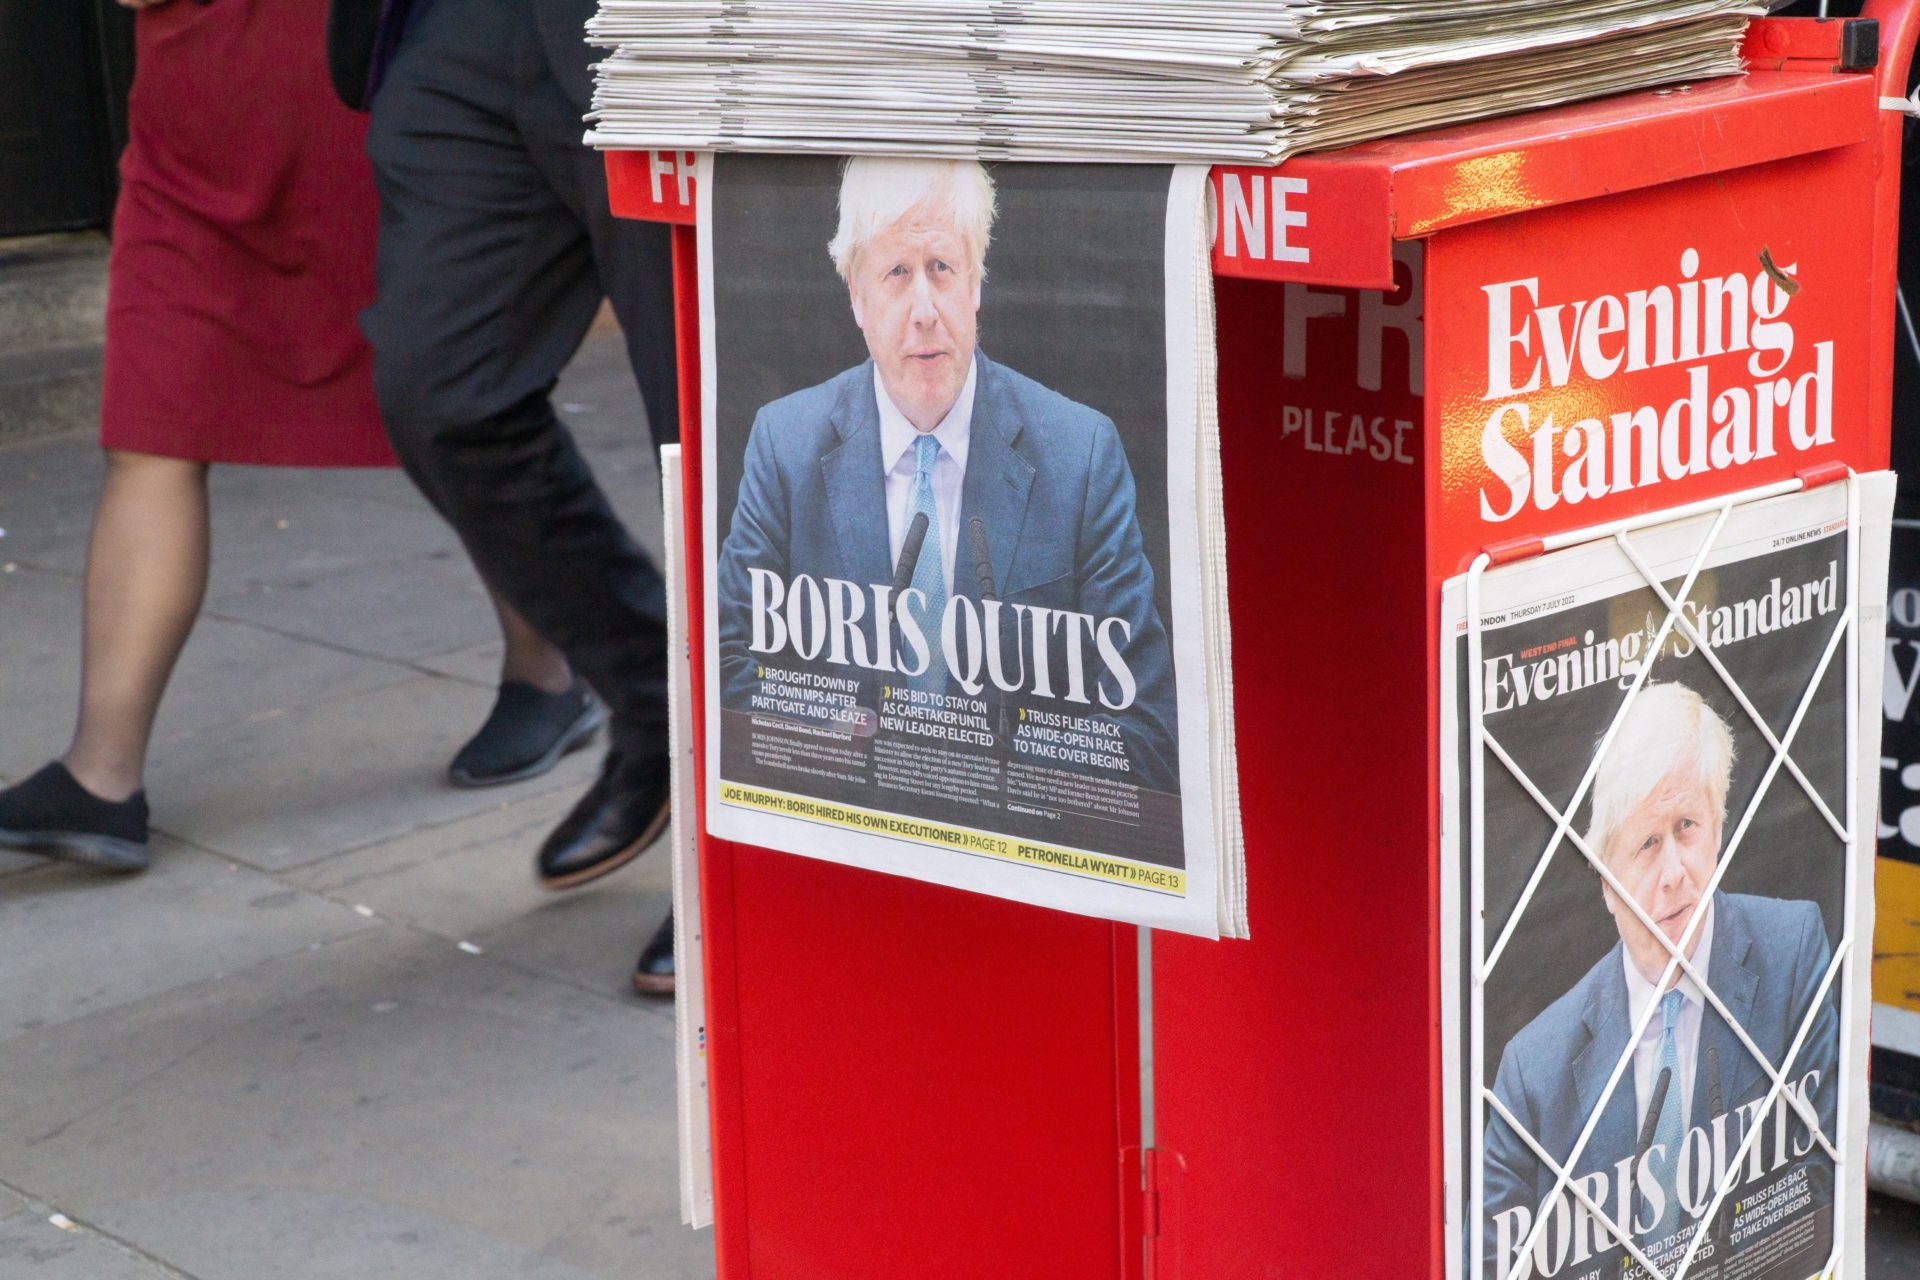 The Evening Standard's front page, proclaiming Boris Quits, 07-07-2022. Image: Anna Watson/Alamy Live News